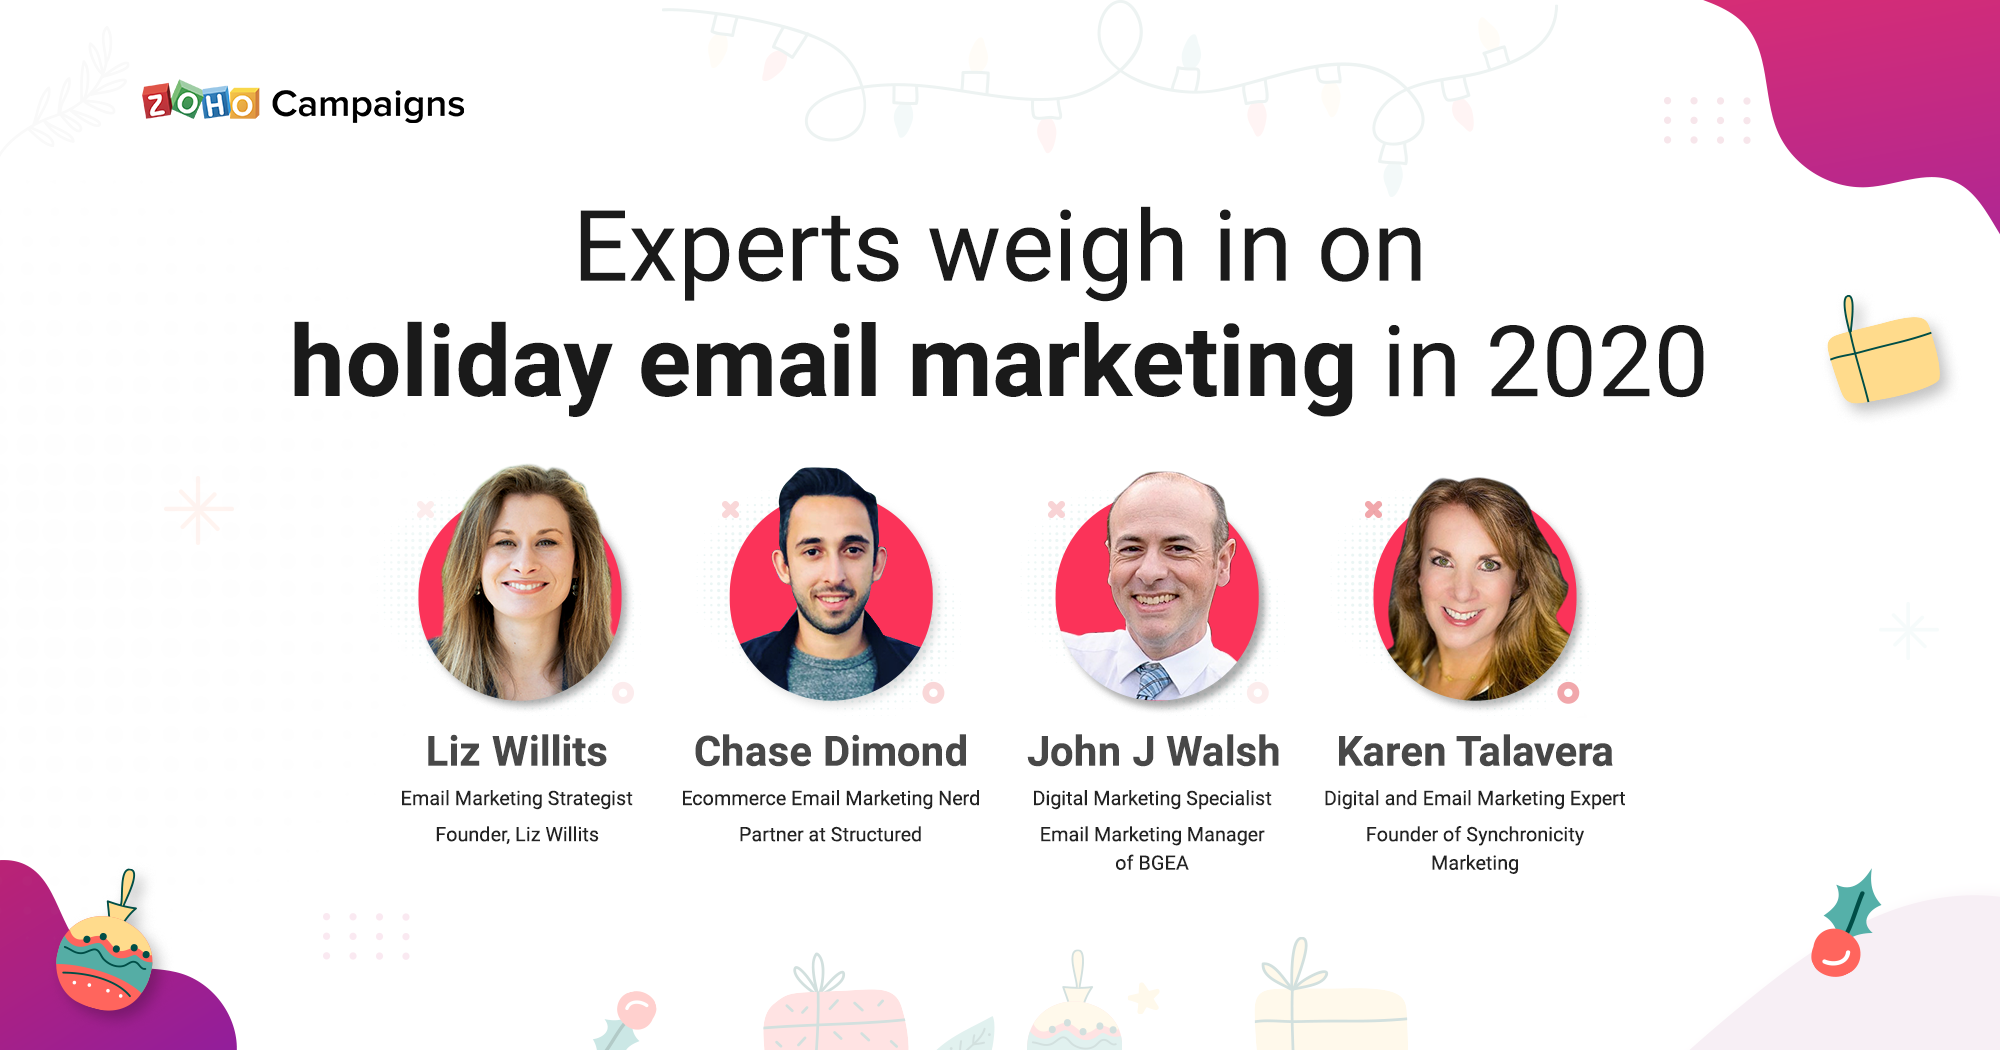 Experts weigh in on holiday email marketing in 2020